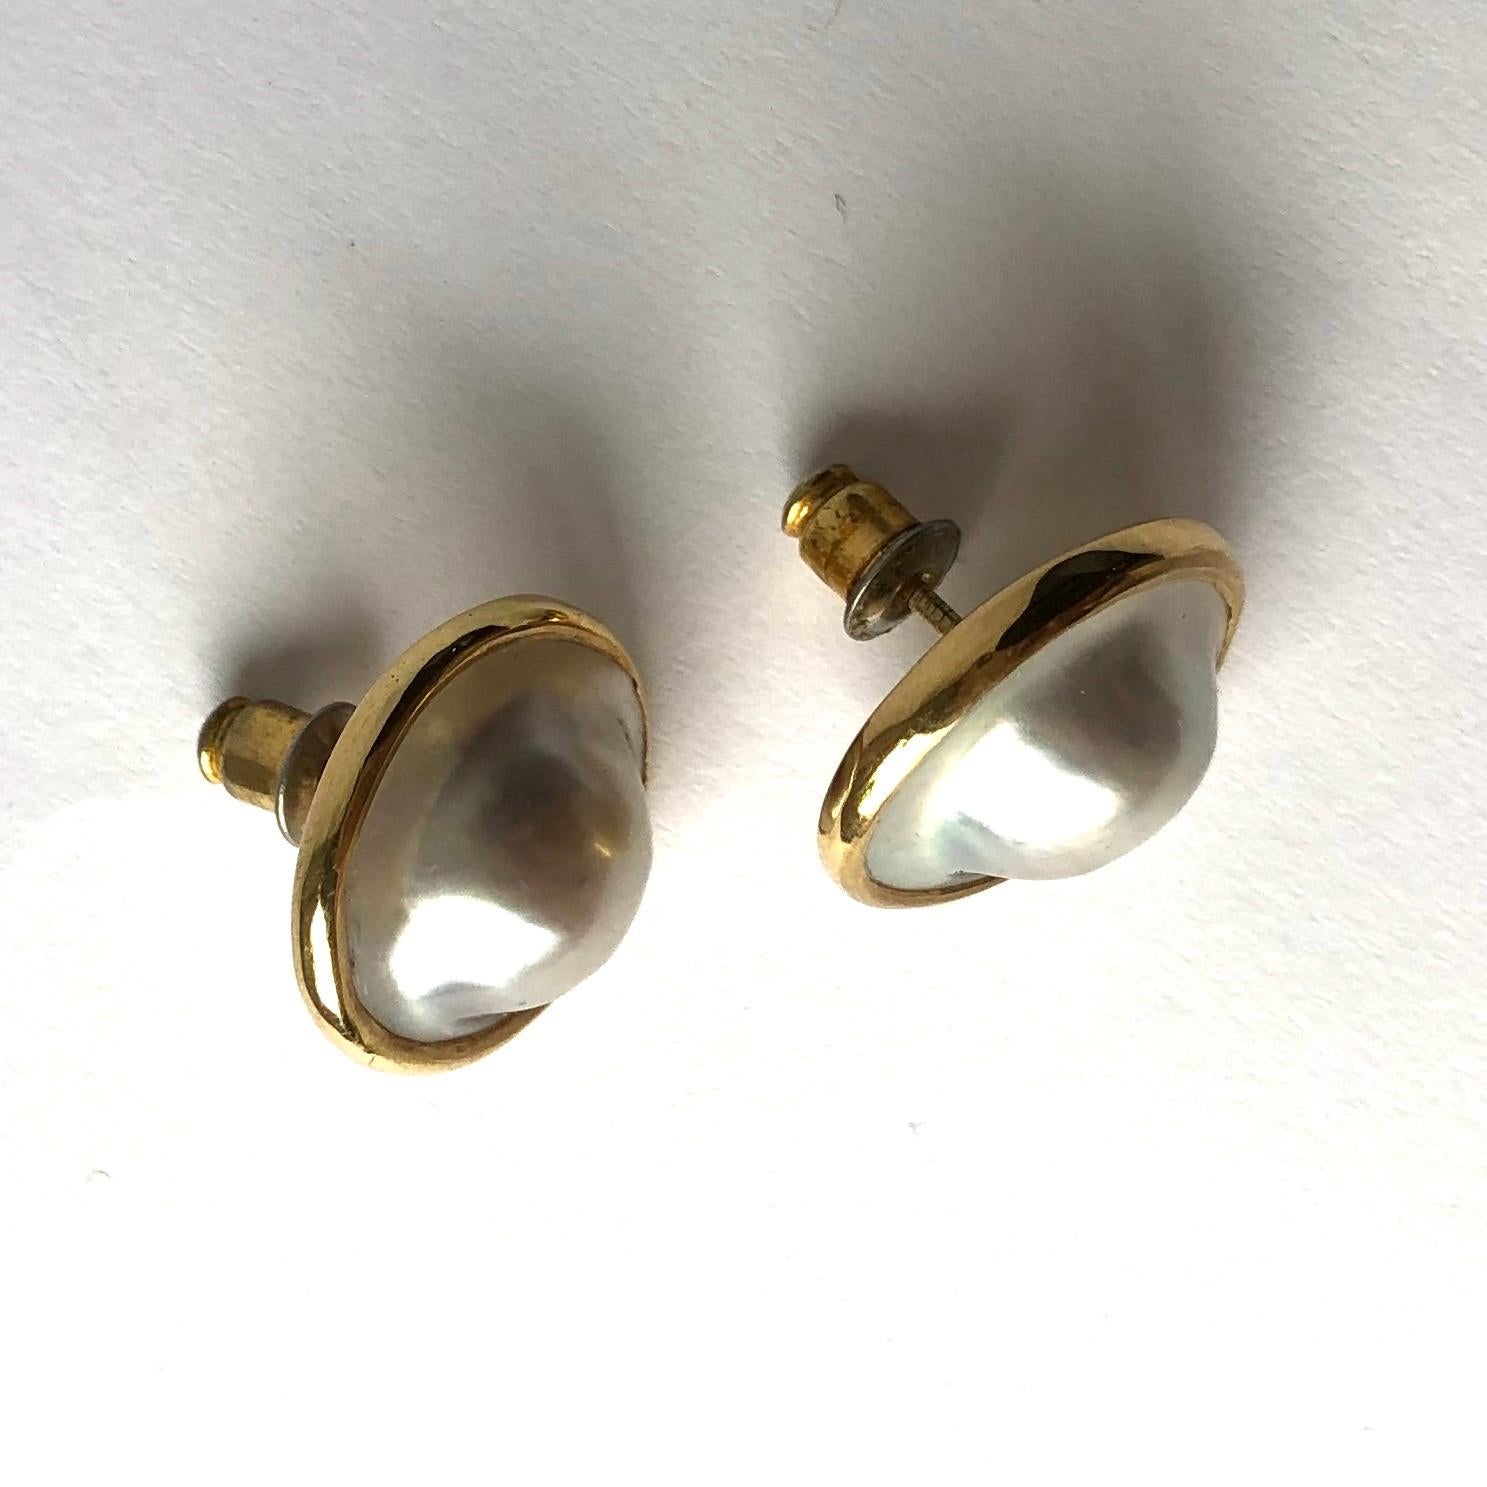 These earrings are show stoppers! The blister pearls have a large spread and are set in bright glossy 18ct gold. The earrings are studs. 

Earring Diameter: 16mm

Weight: 5.60g